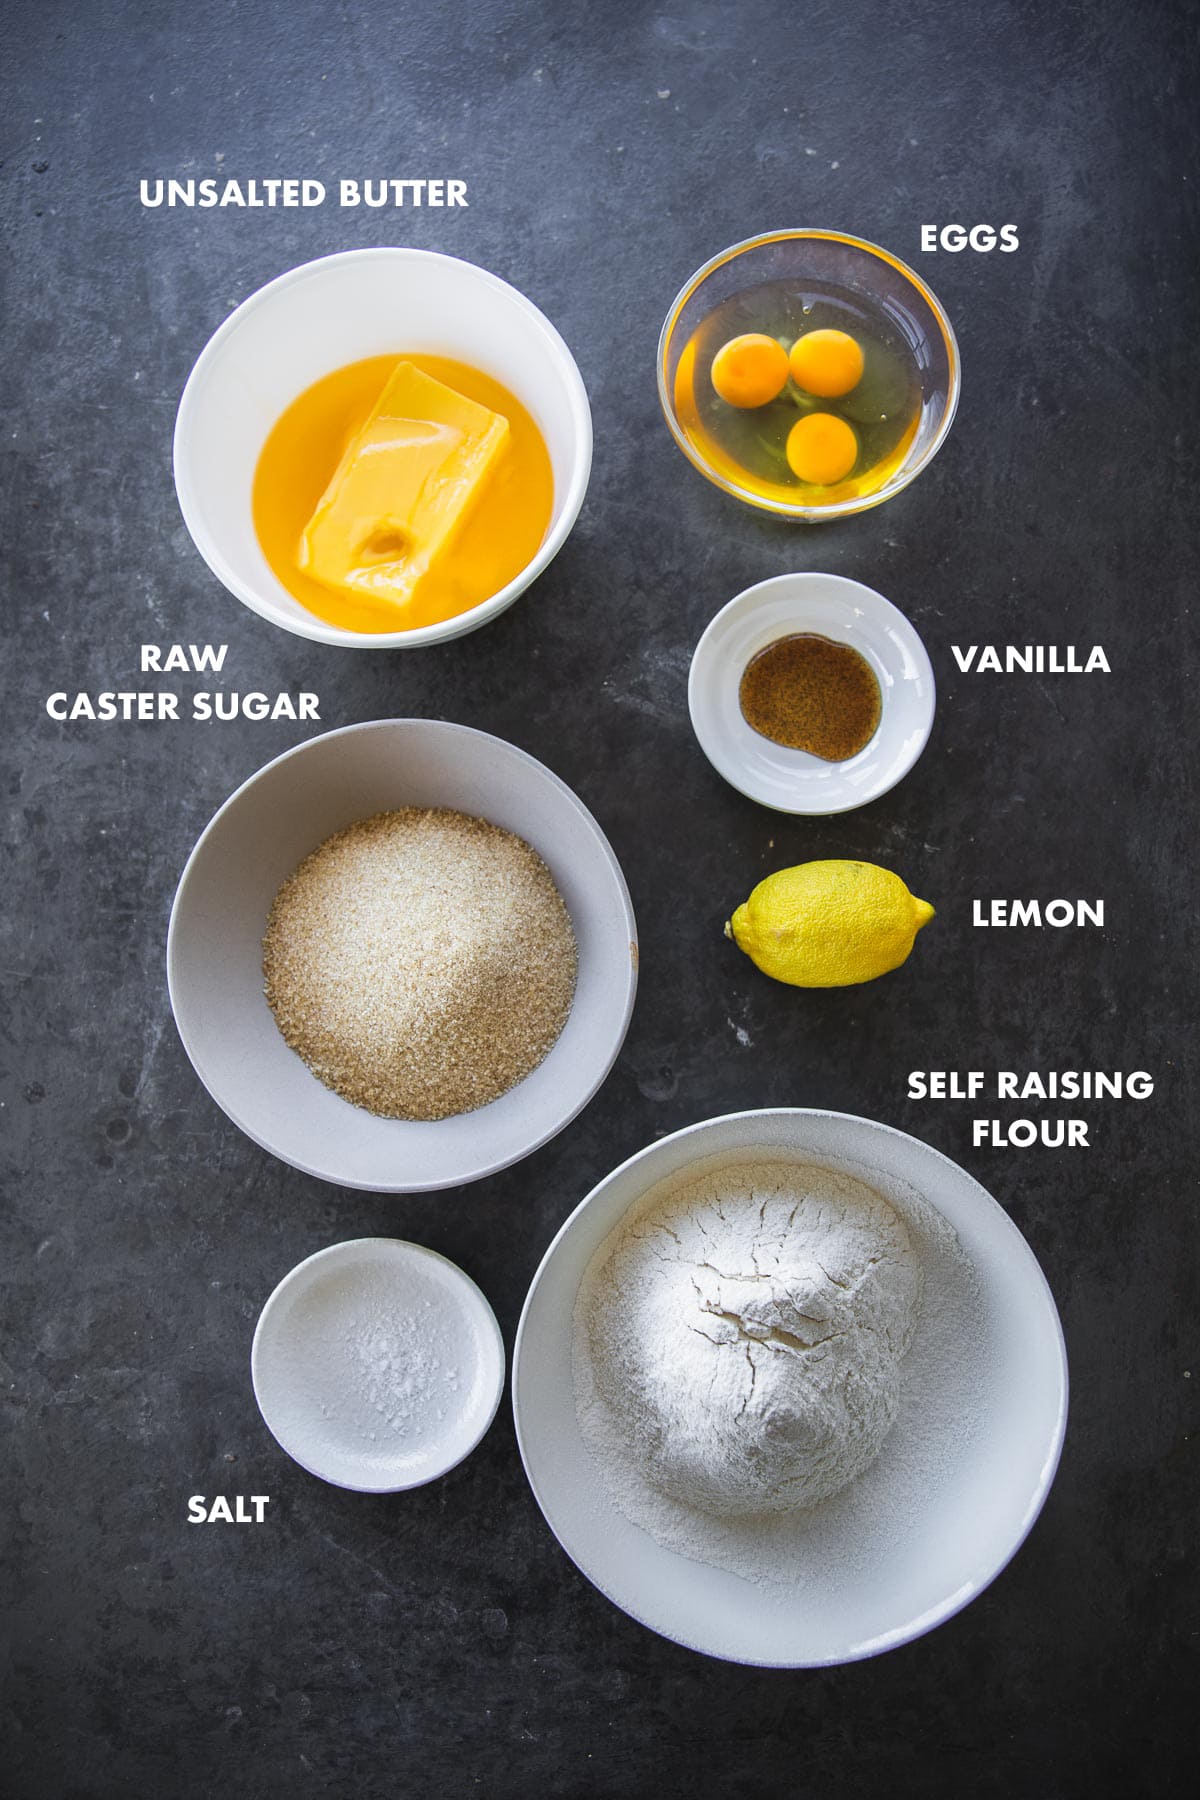 Ingredients for lemon madeira cake measured out in bowls and labeled - self raising flour, vanilla, lemon, caster sugar, eggs and unsalted butter.